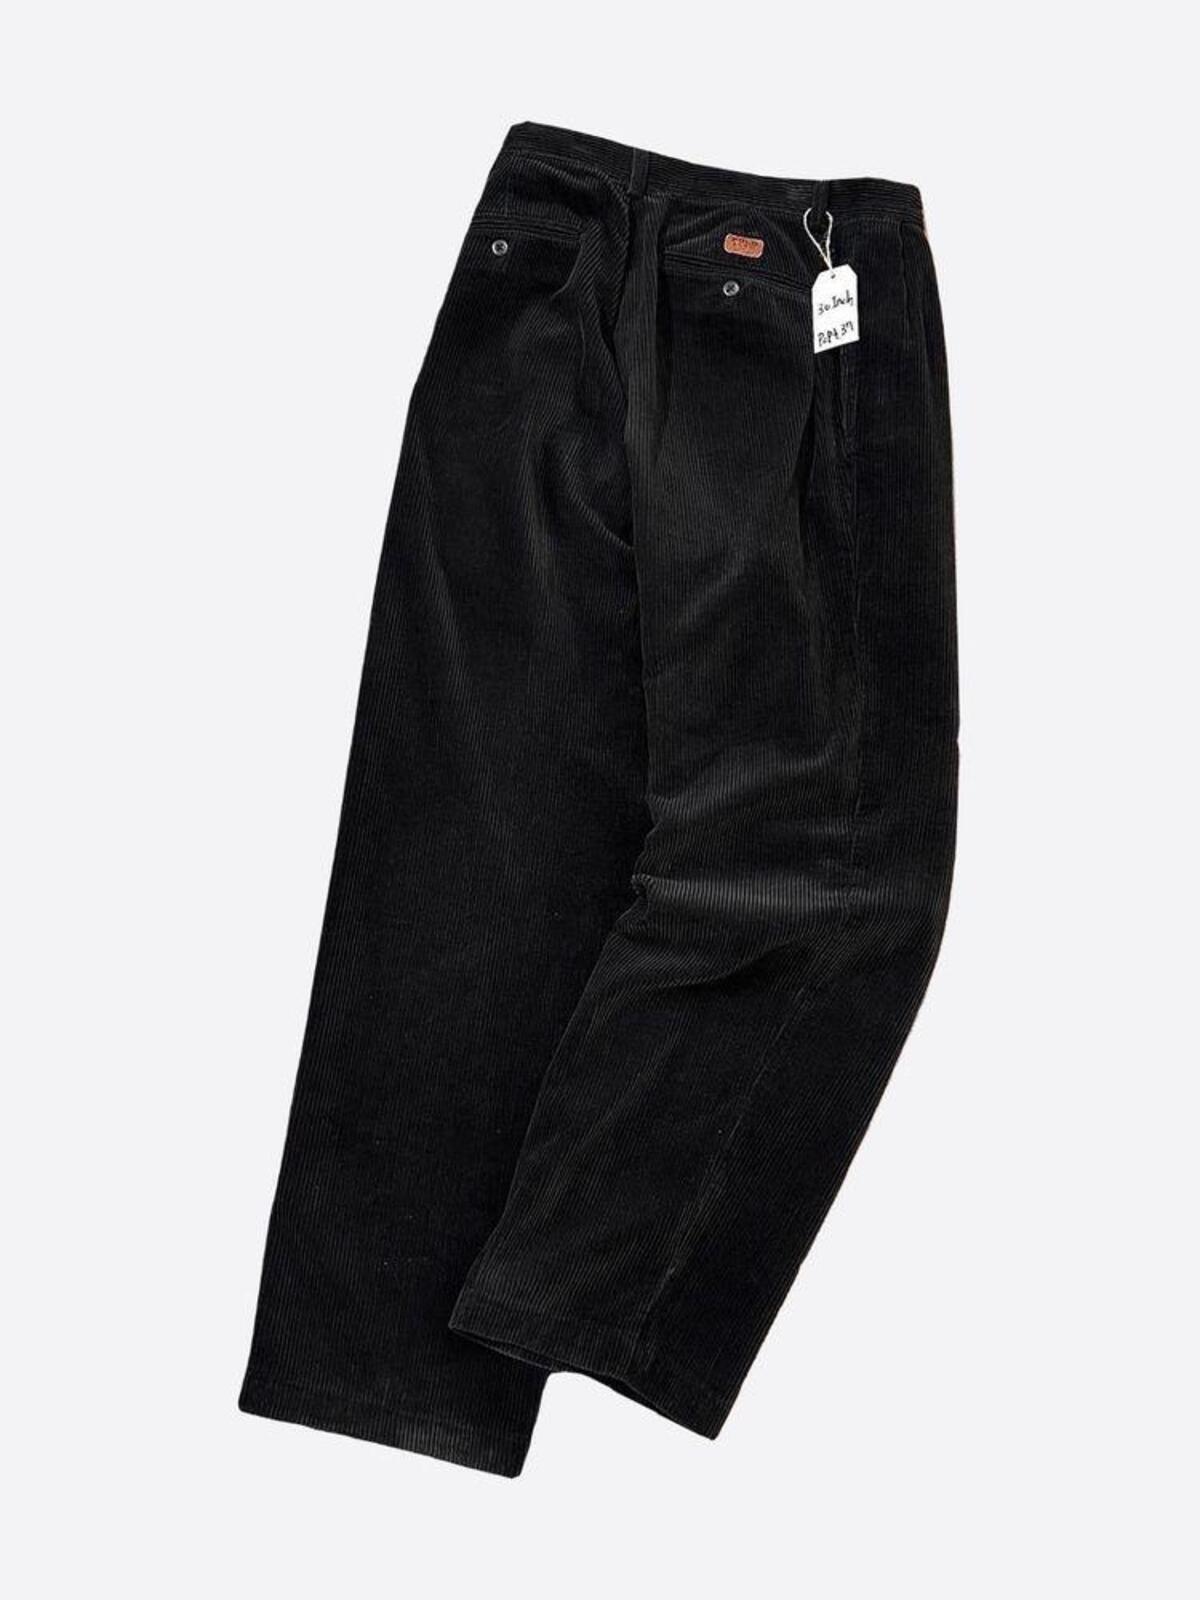 Black Corduroy Trouser (30inch) - With Homie 위드호미